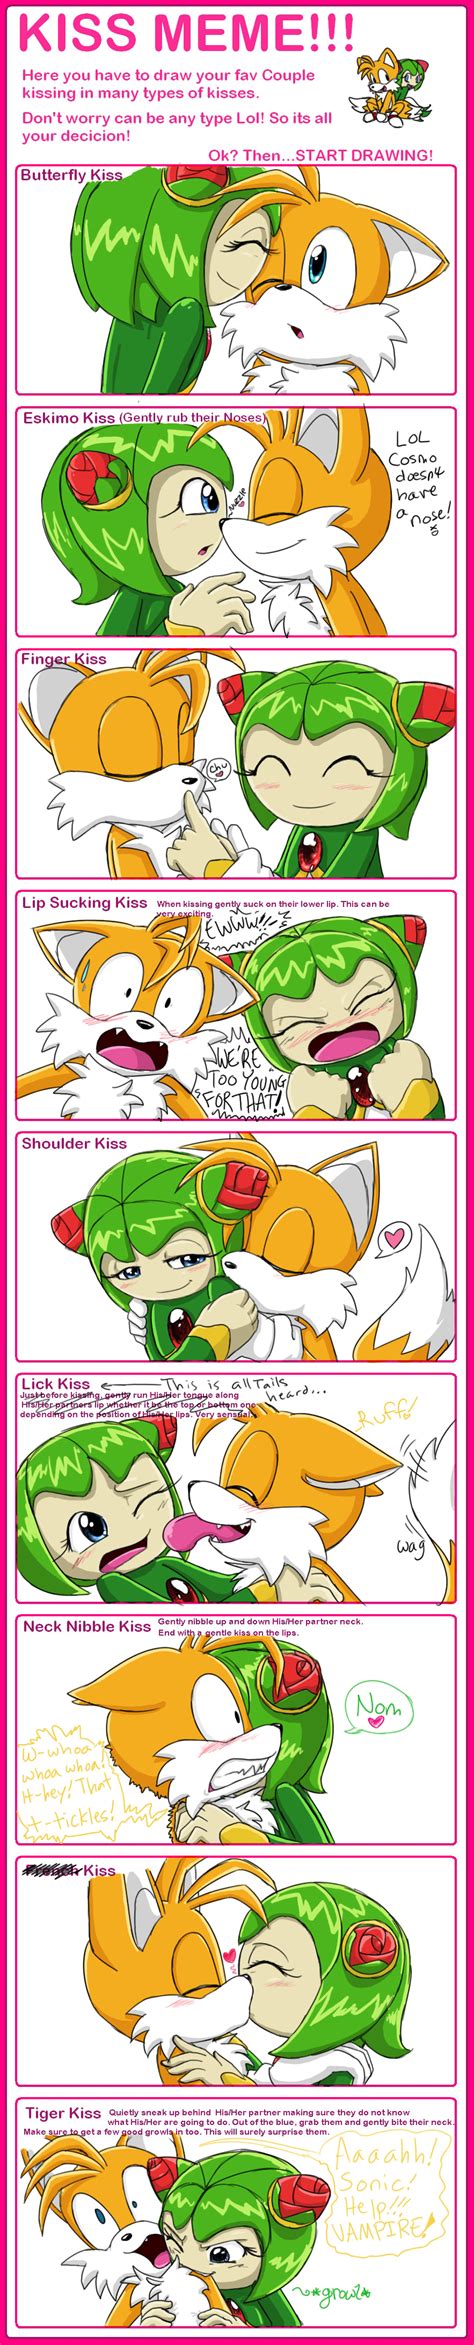 Tails and cosmo are the characters, and the song is kiss the girl, by ashly tisdale. Kiss Meme_TailsXCosmo by WhiteRaven4 on DeviantArt